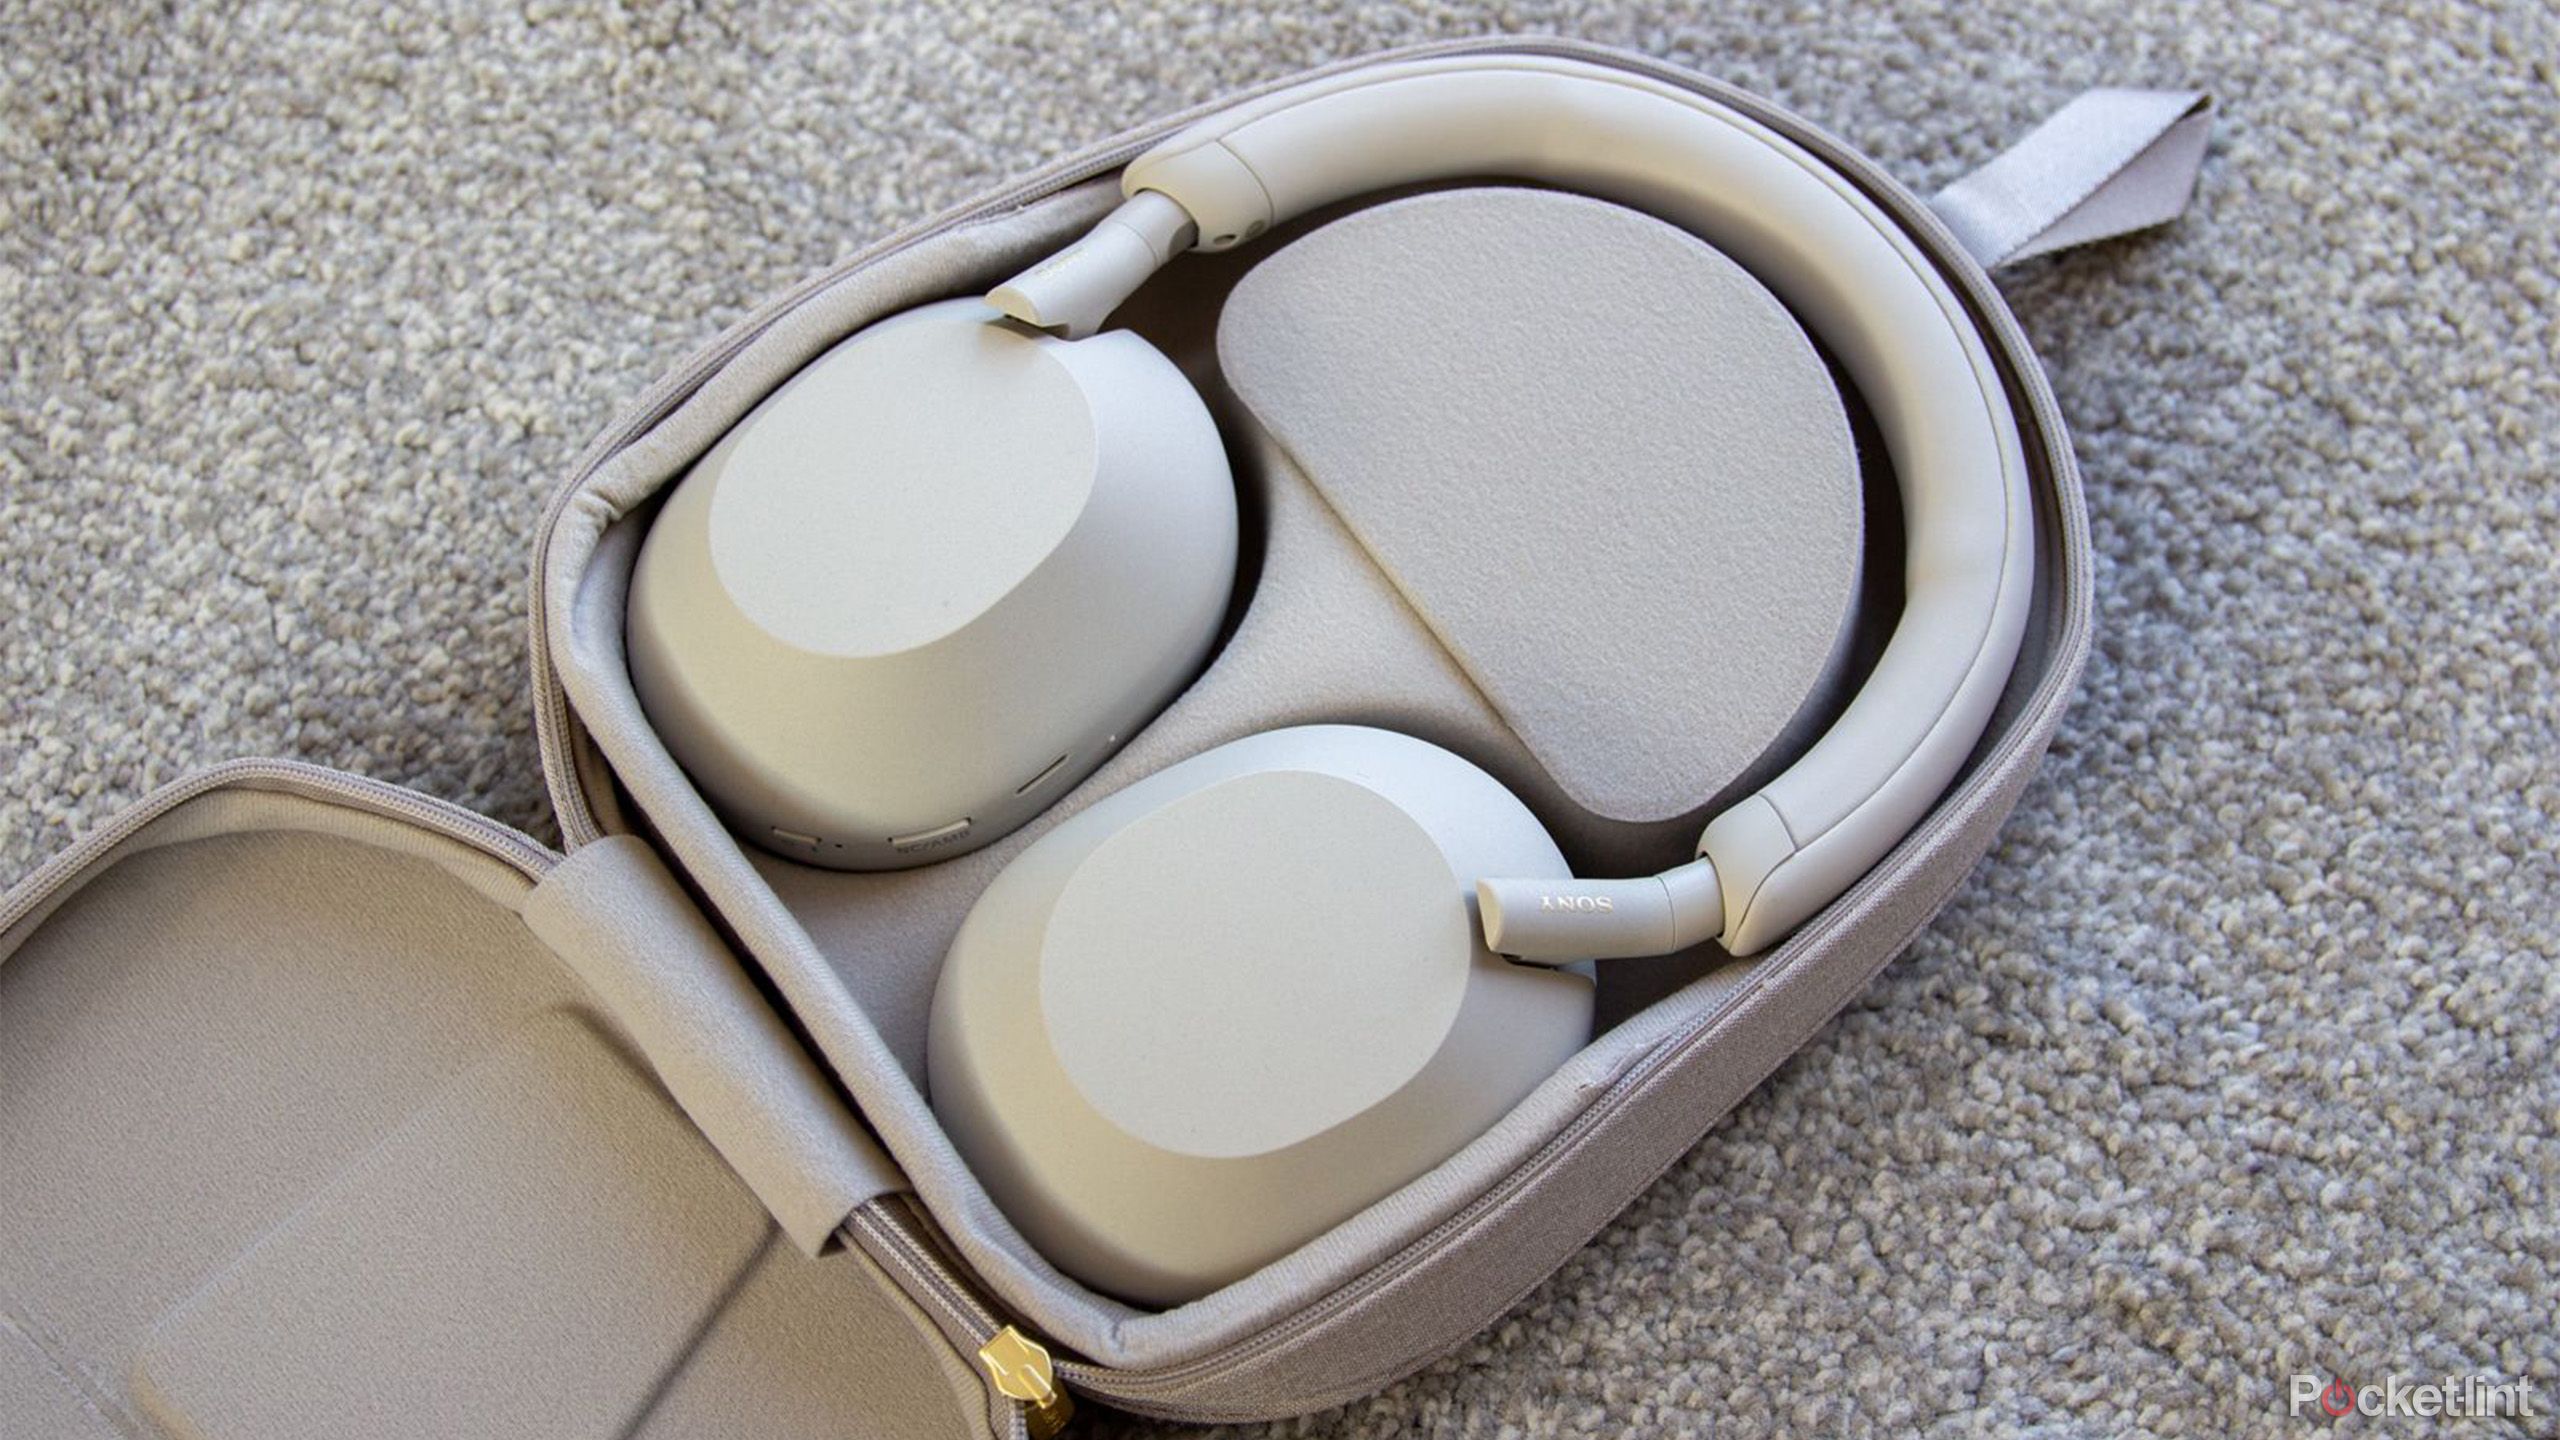 Sony WH-1000XM5 noise-cancelling headphones for $348 is music to our ears